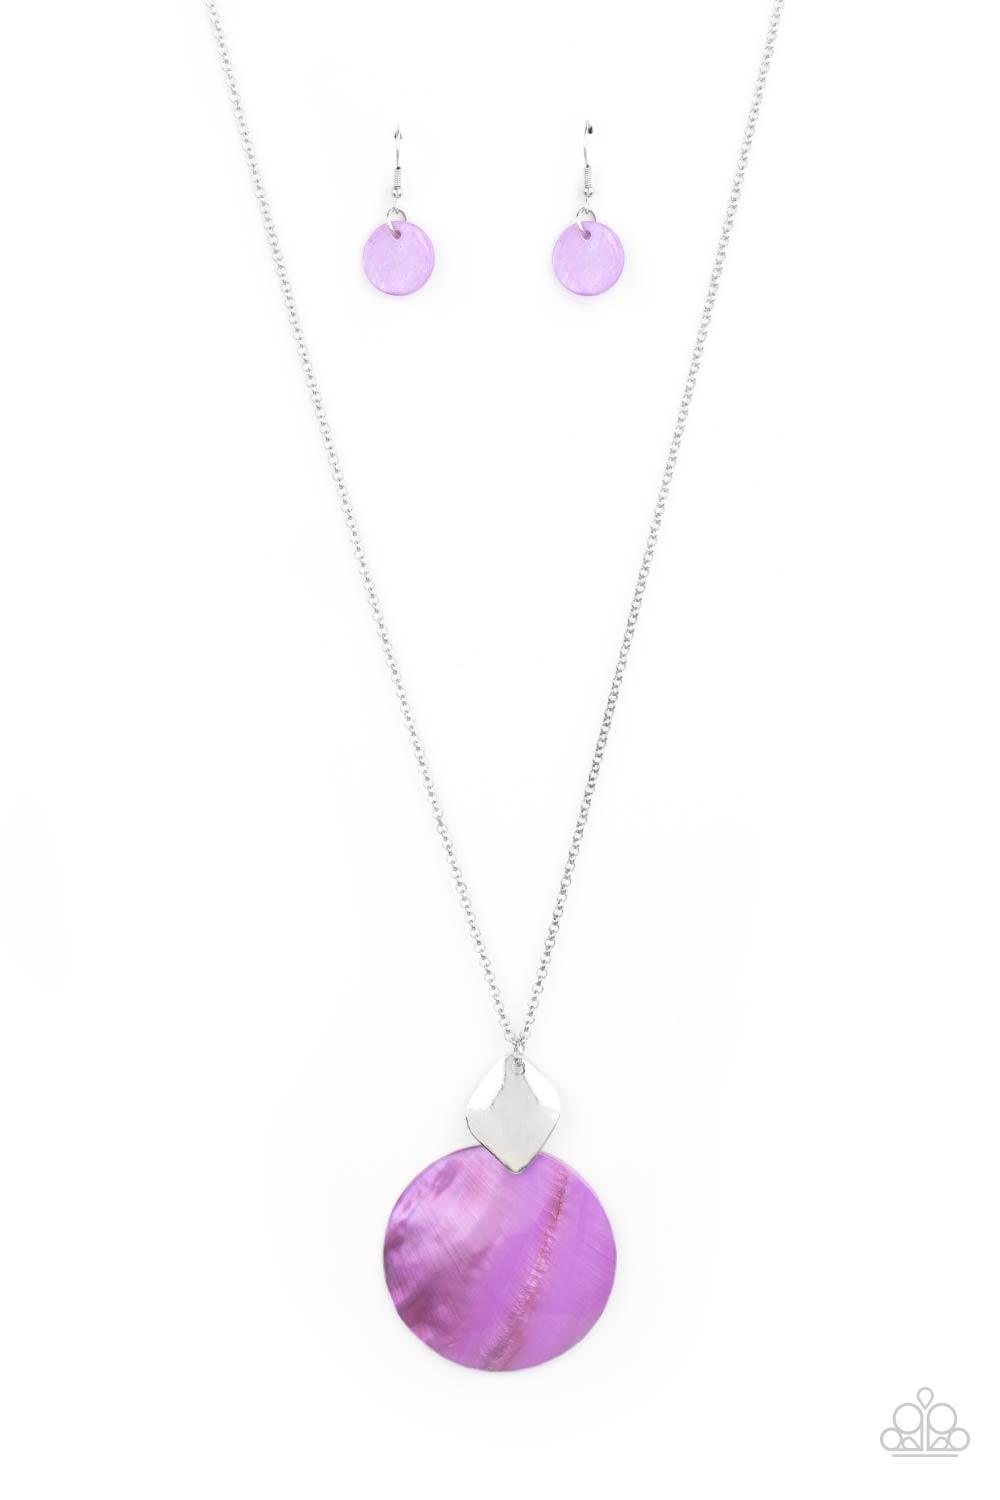 Paparazzi Accessories Tidal Tease - Purple Featuring a glistening iridescence, a Lavender shell-like disc attaches to a shiny silver frame at the bottom of a lengthened silver chain, creating a summery pendant. Features an adjustable clasp closure. Sold a